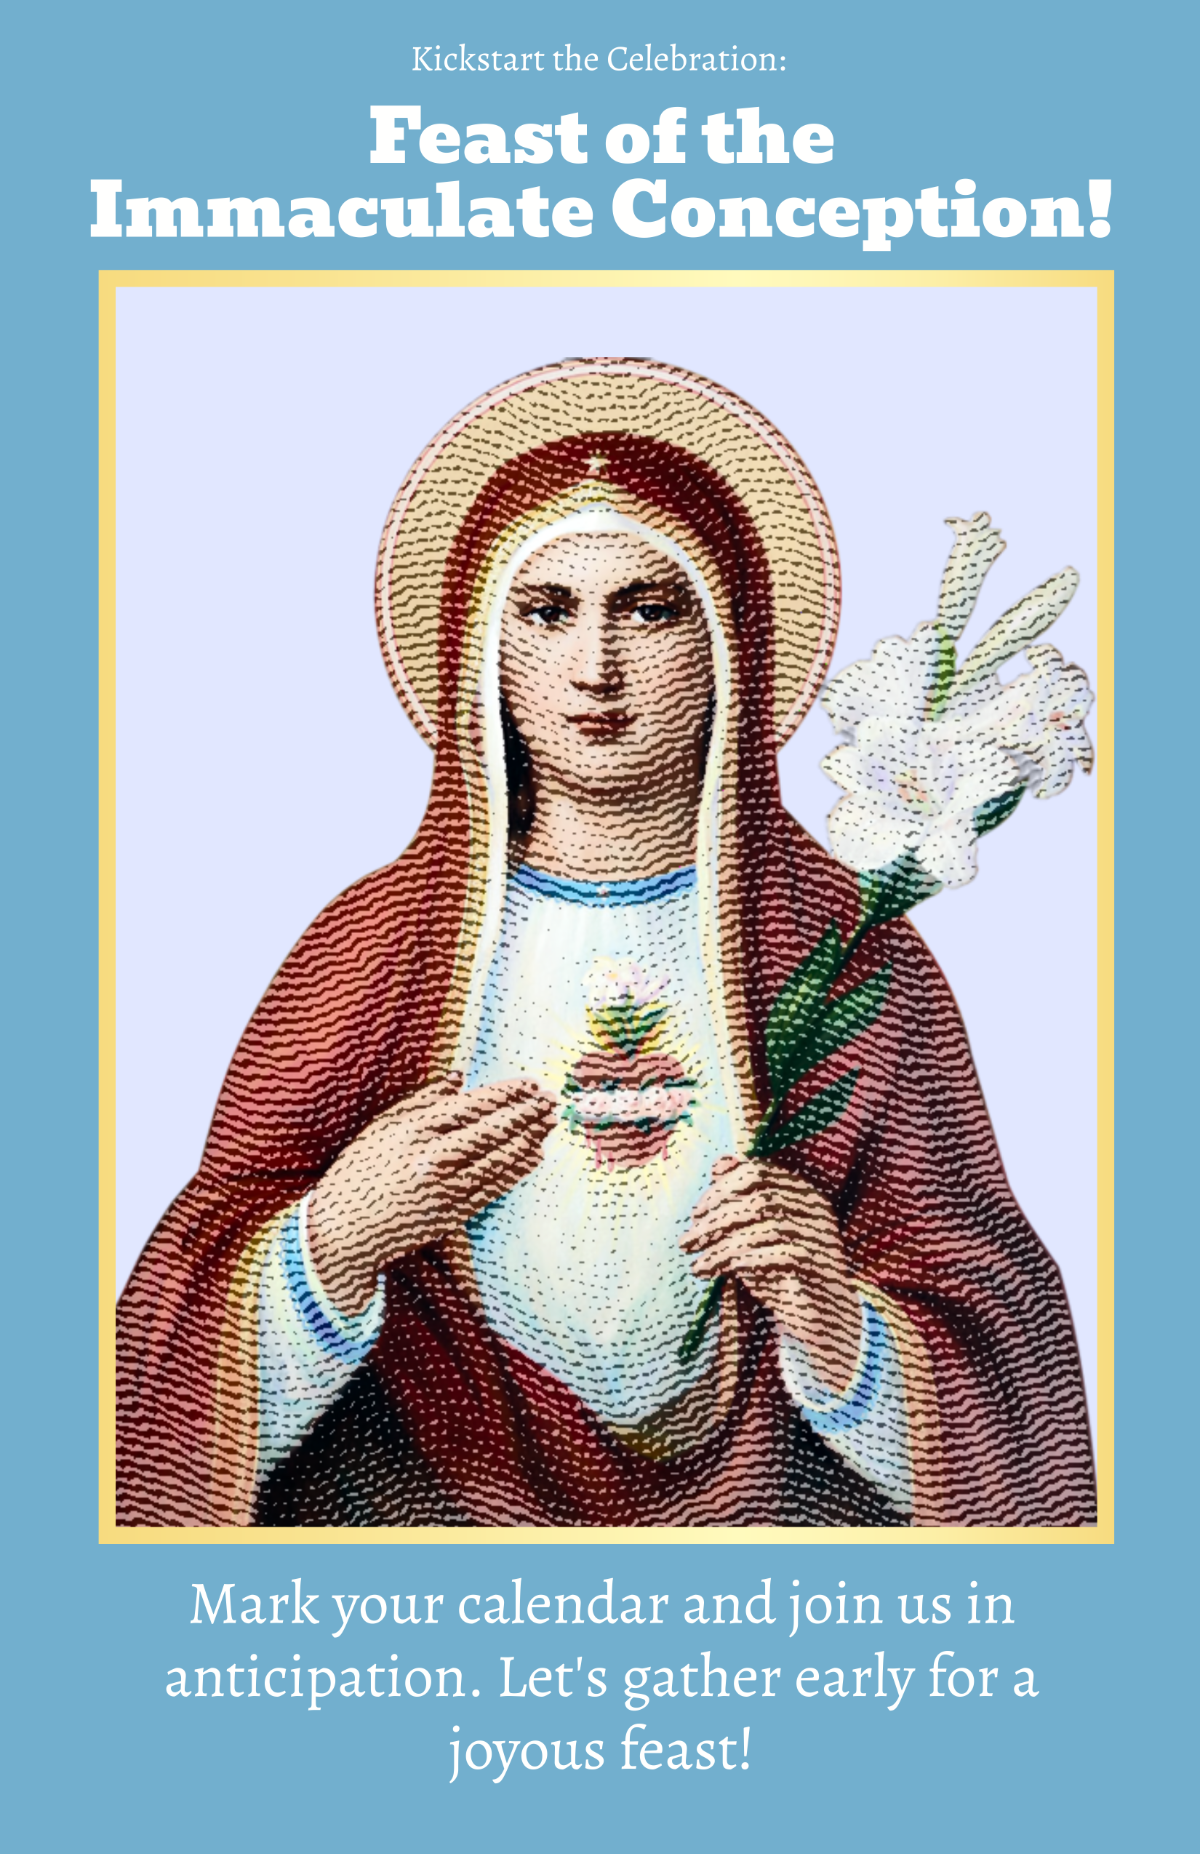 Early Feast of the Immaculate Conception Poster Template